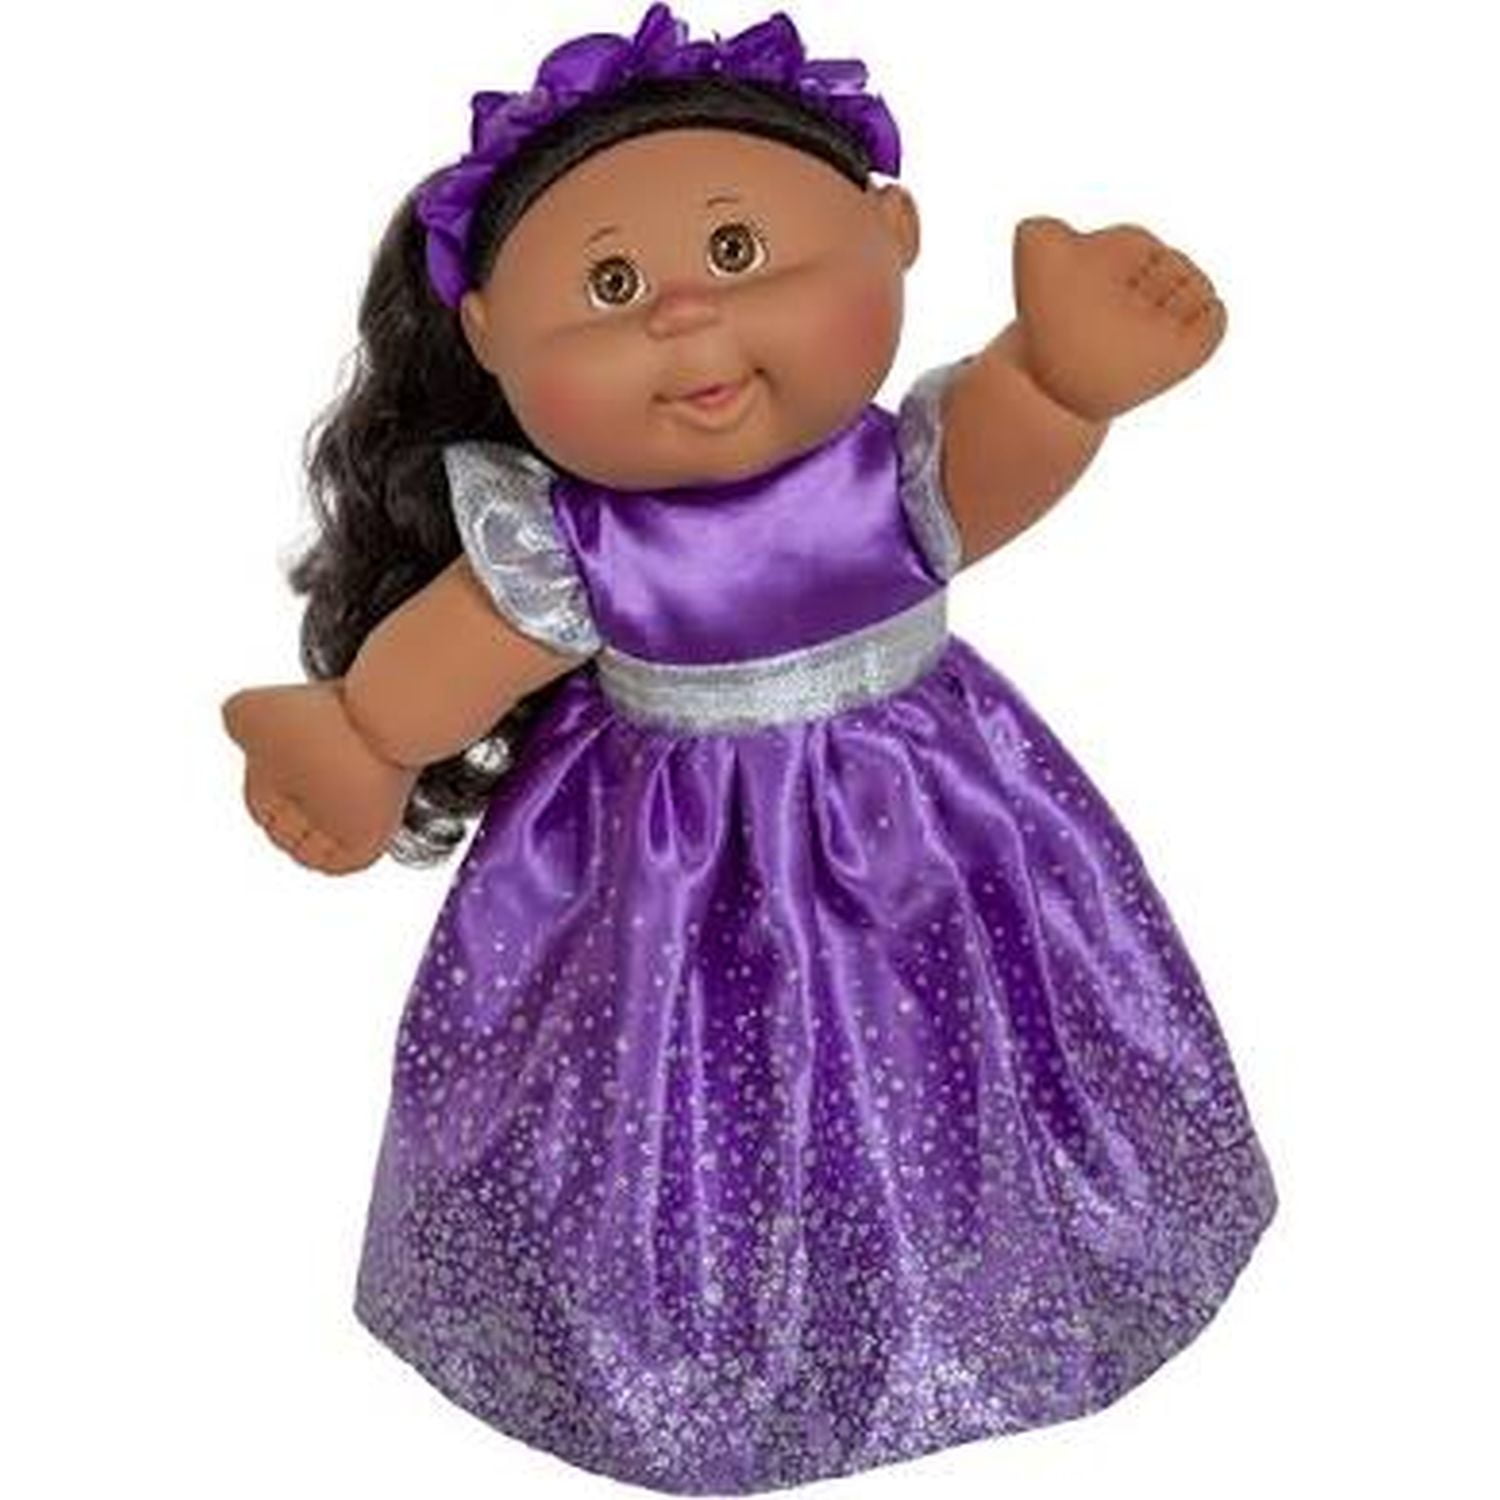 cabbage patch doll holiday 2018